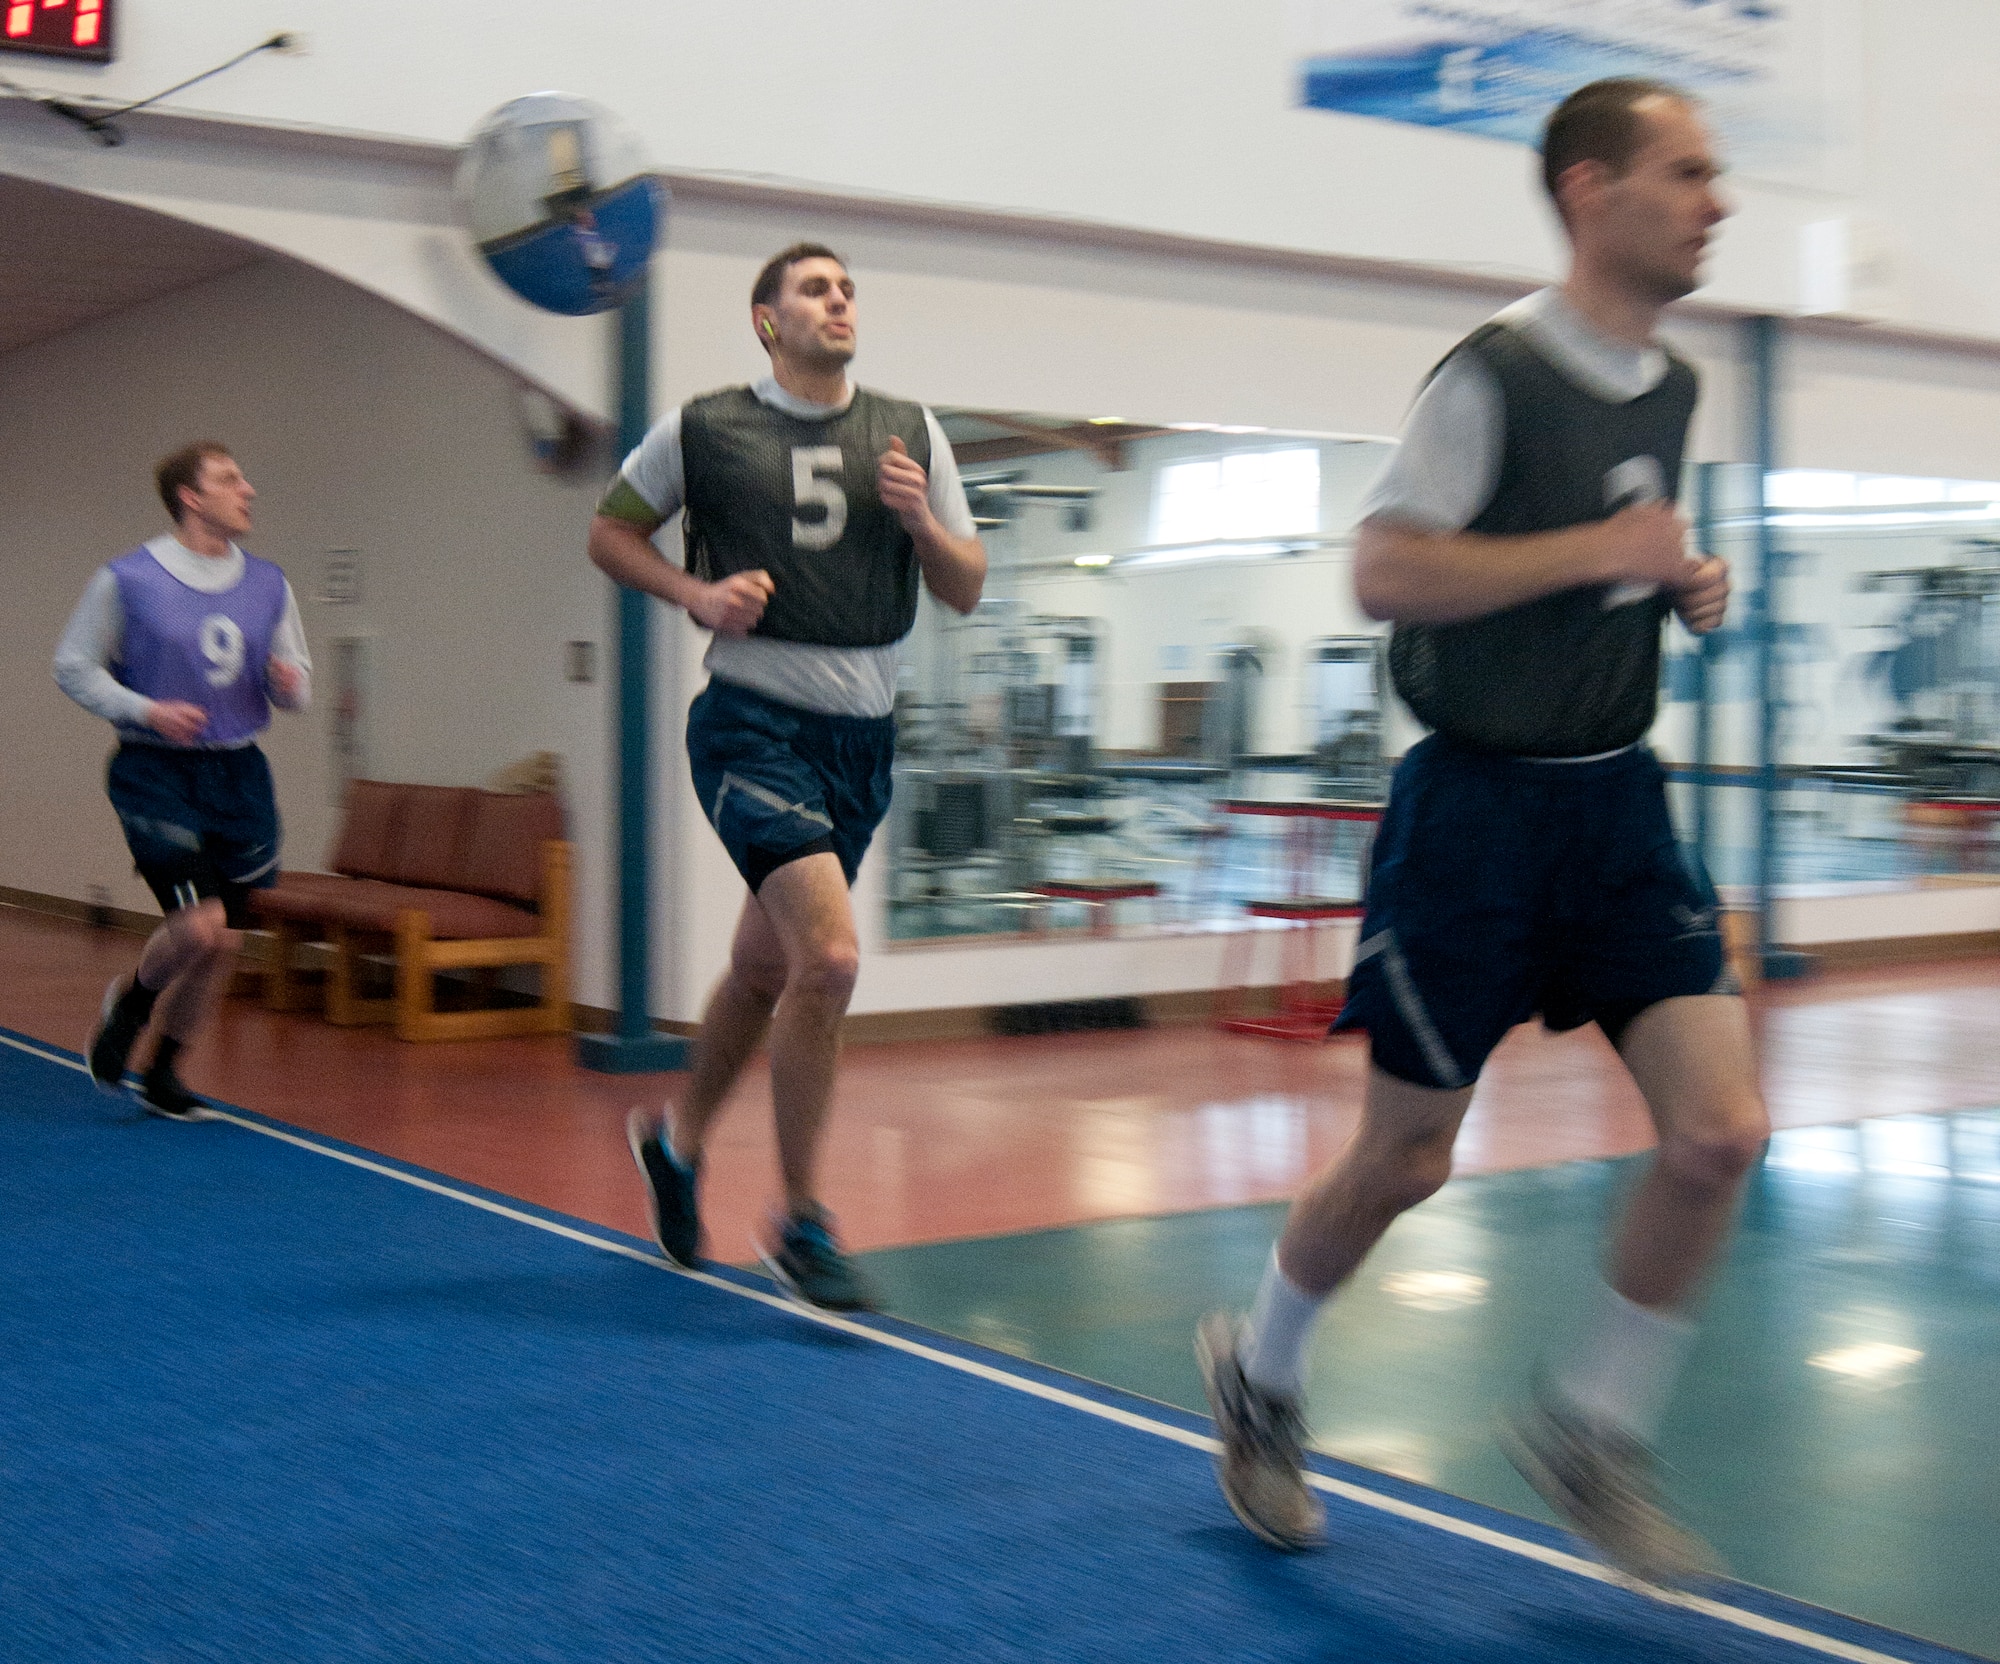 Airmen run the track in the Independence Hall Fitness Center on F.E. Warren Air Force Base, Wyo., March 4, 2014, during the timed run portion of their Air Force fitness assessment. The timed run, which accounts for 60 percent of the possible points Airmen can score on the assessment, is the portion of the assessment with which most Airmen struggle. The 90th Force Support Squadron Fitness Improvement Program aims to help Airmen improve their assessment scores, so cardio training is an important part of the program, which will help Airmen score higher on the timed run portion of the test. (U.S. Air Force photo by Airman 1st Class Jason Wiese)